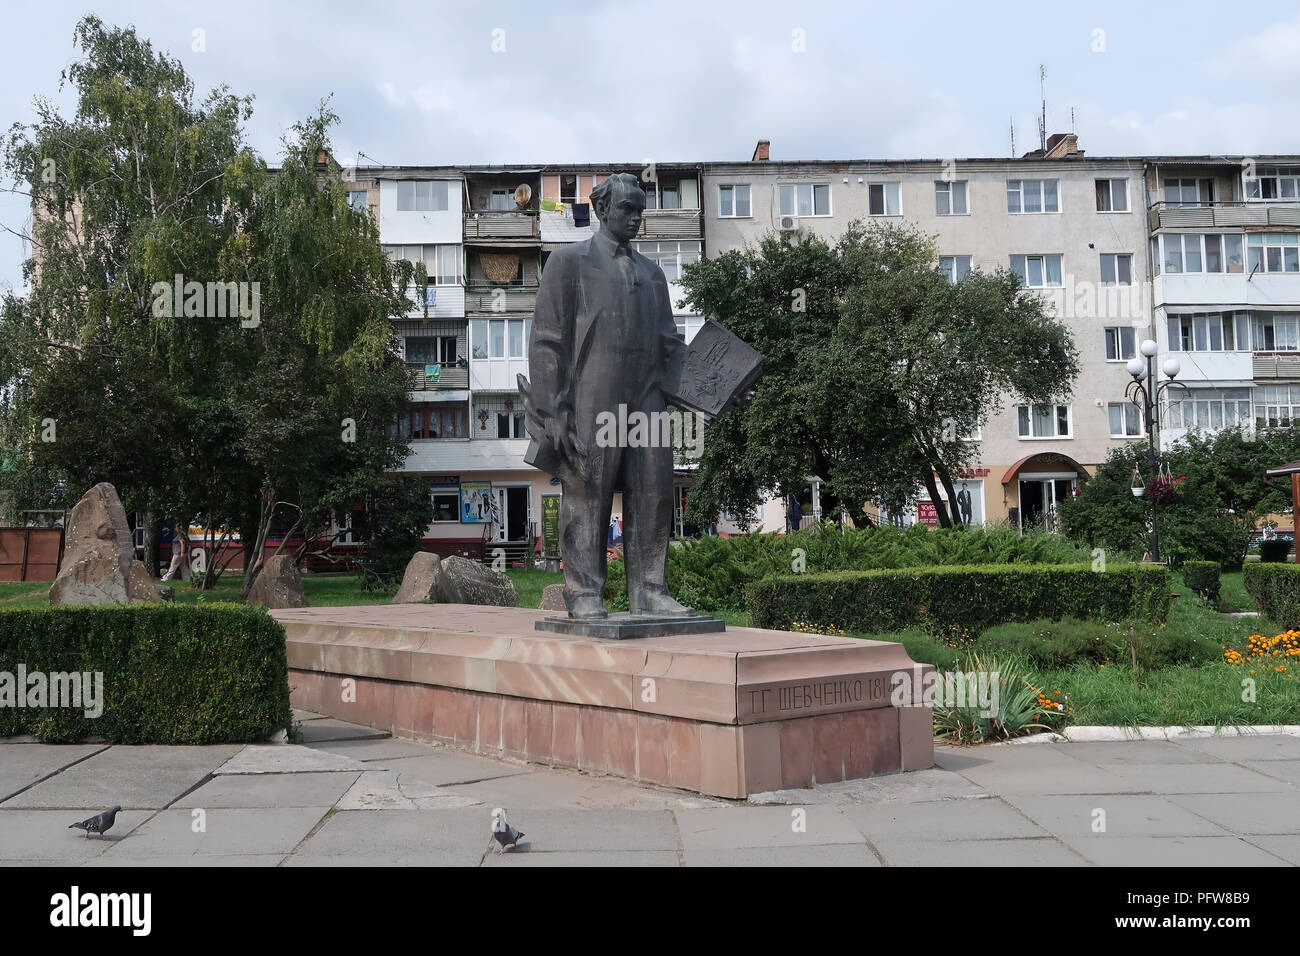 Monument to Taras Hryhorovych Shevchenko also known as Kobzar Taras, who was a Ukrainian poet, and political figure, which his literary heritage is regarded to be the foundation of modern Ukrainian literature and, to a large extent, the modern Ukrainian language, place in the center of  the city of Chortkiv which was once home to a large Jewish community and was annihilated, brutally, by the Germans during the Second World War in Ternopil Oblast (province) in western Ukraine. Stock Photo